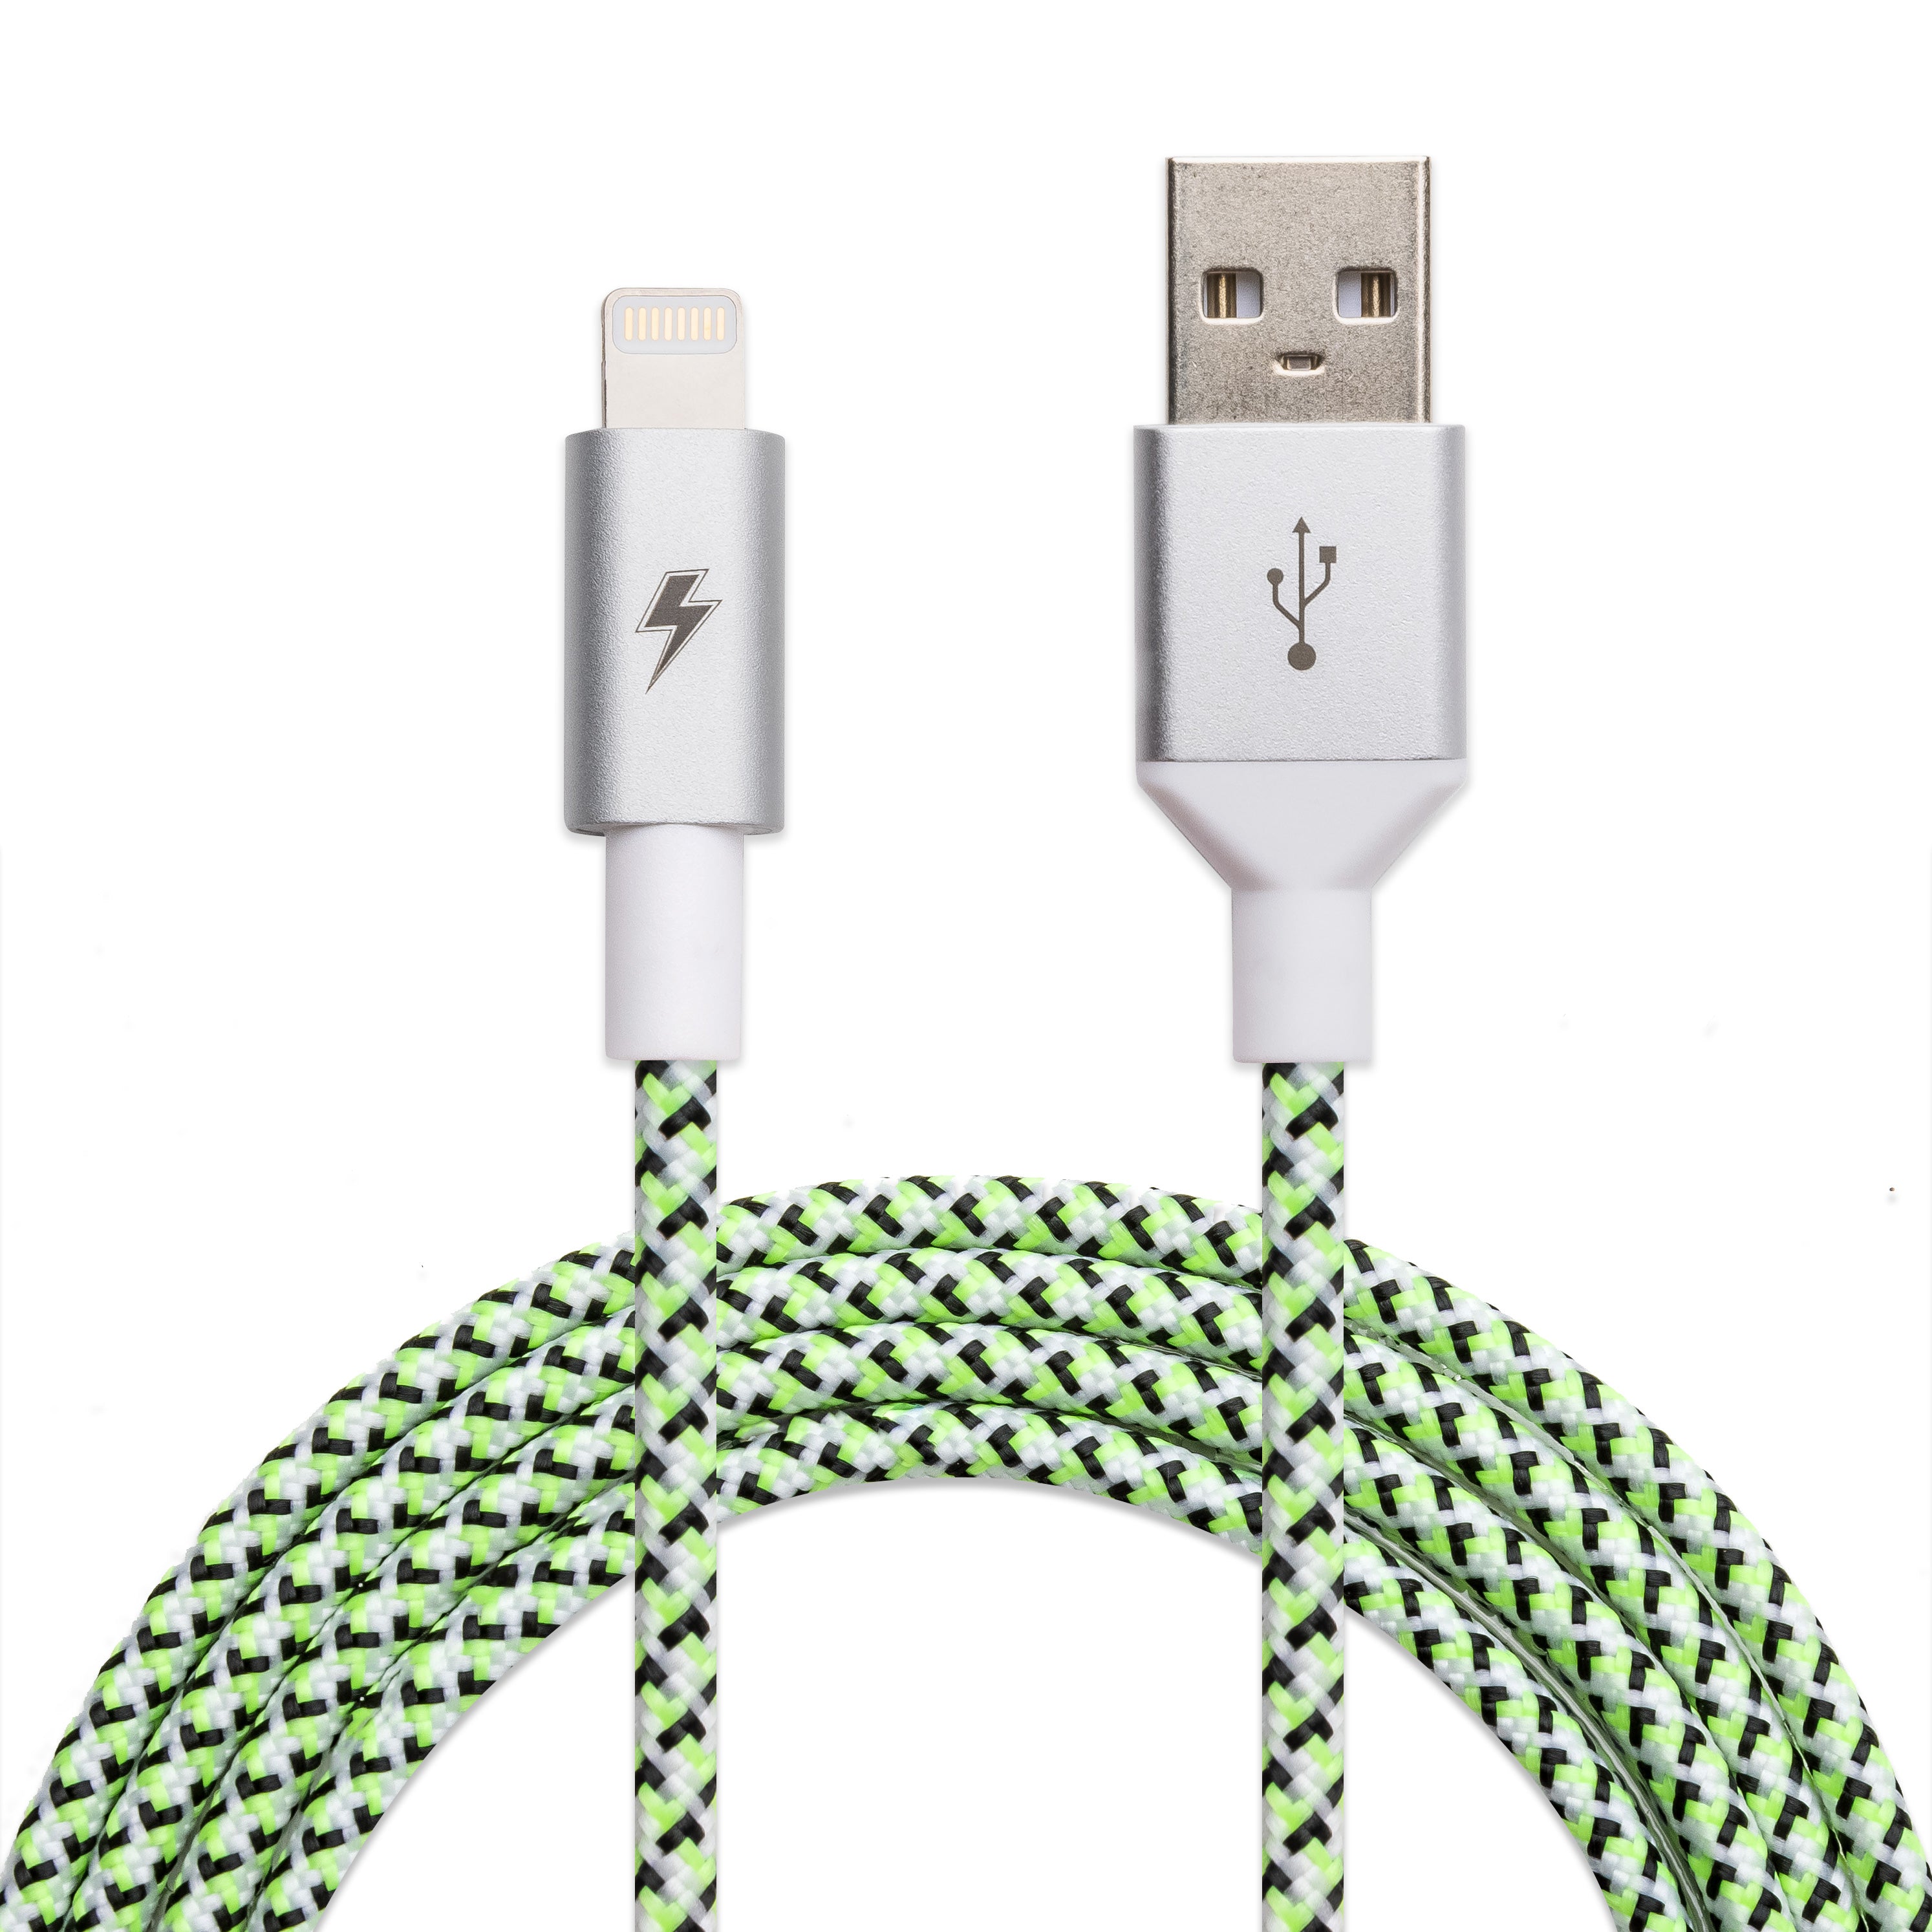 Black and White Glow Lightning Cable [10 ft / 3m length] – Charge